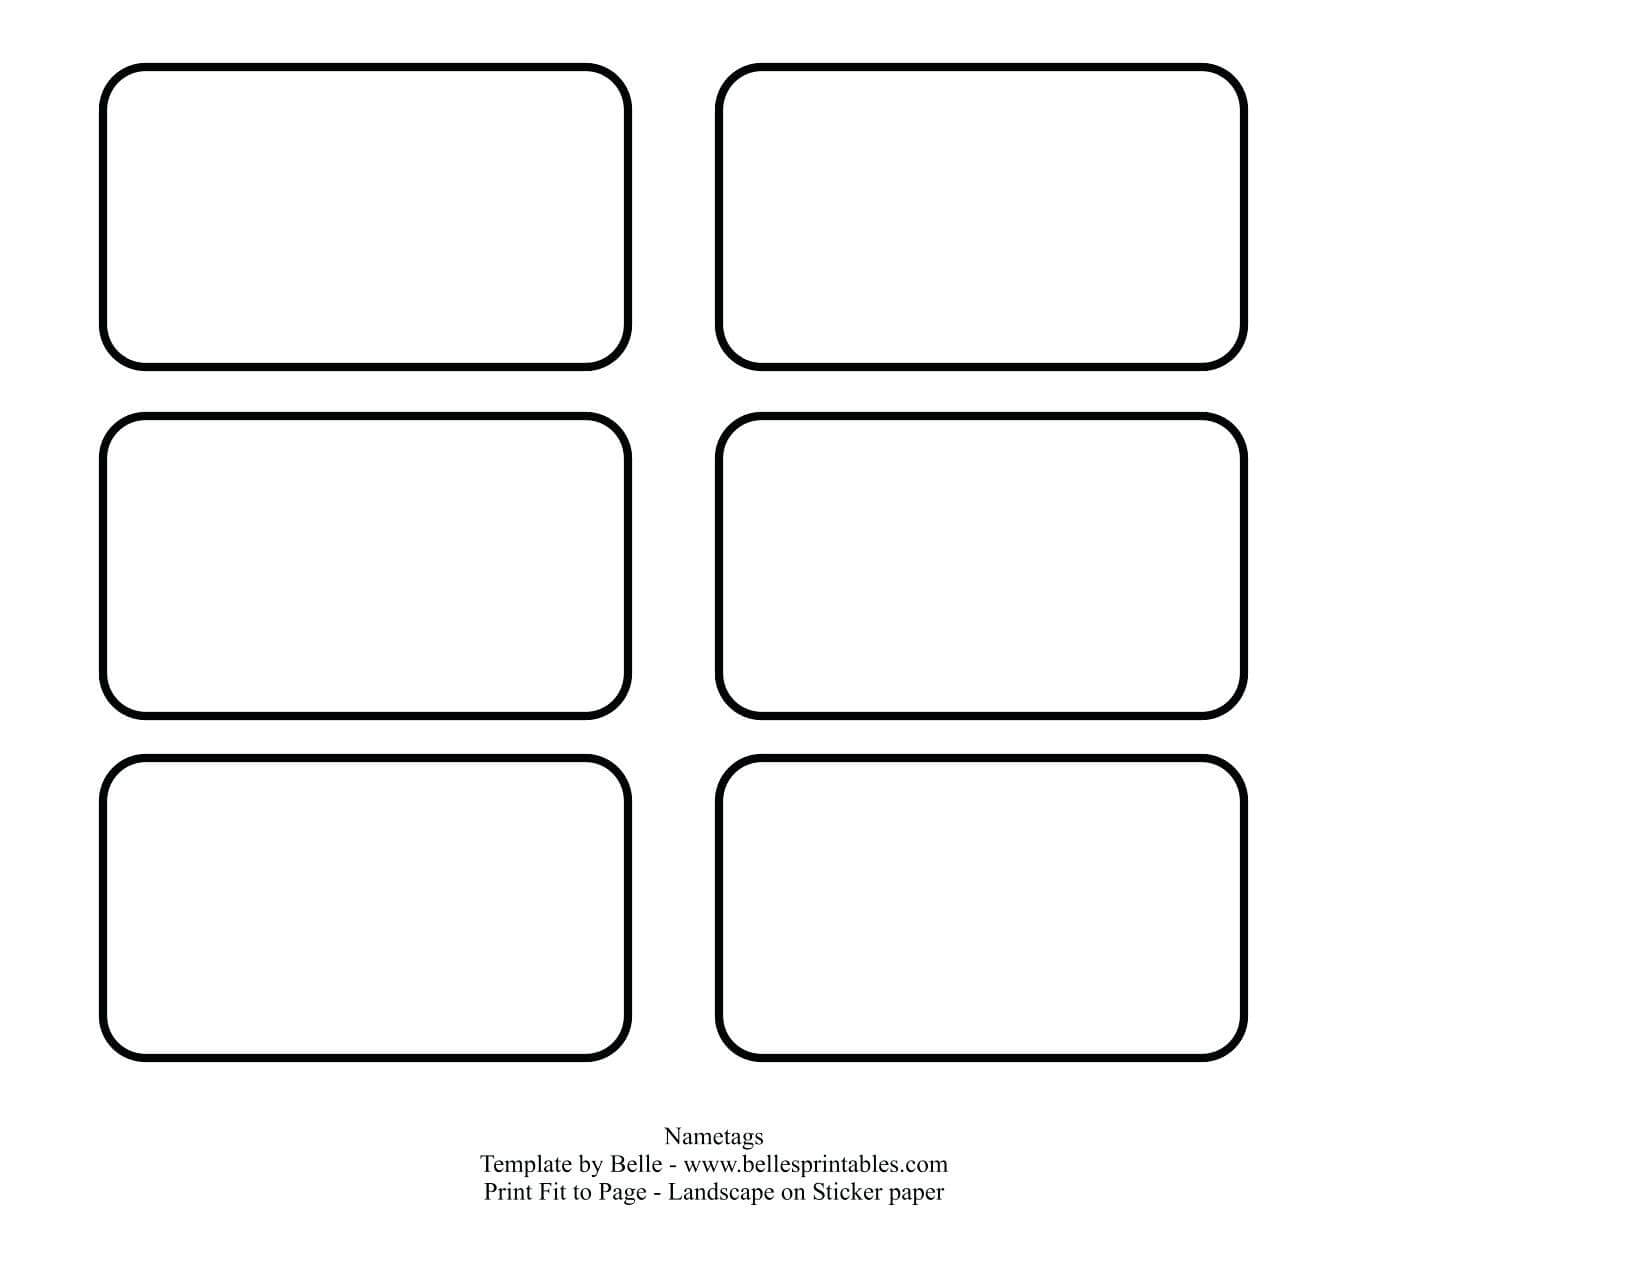 010-blank-name-tags-printable-tag-templates-free-inside-for-visitor